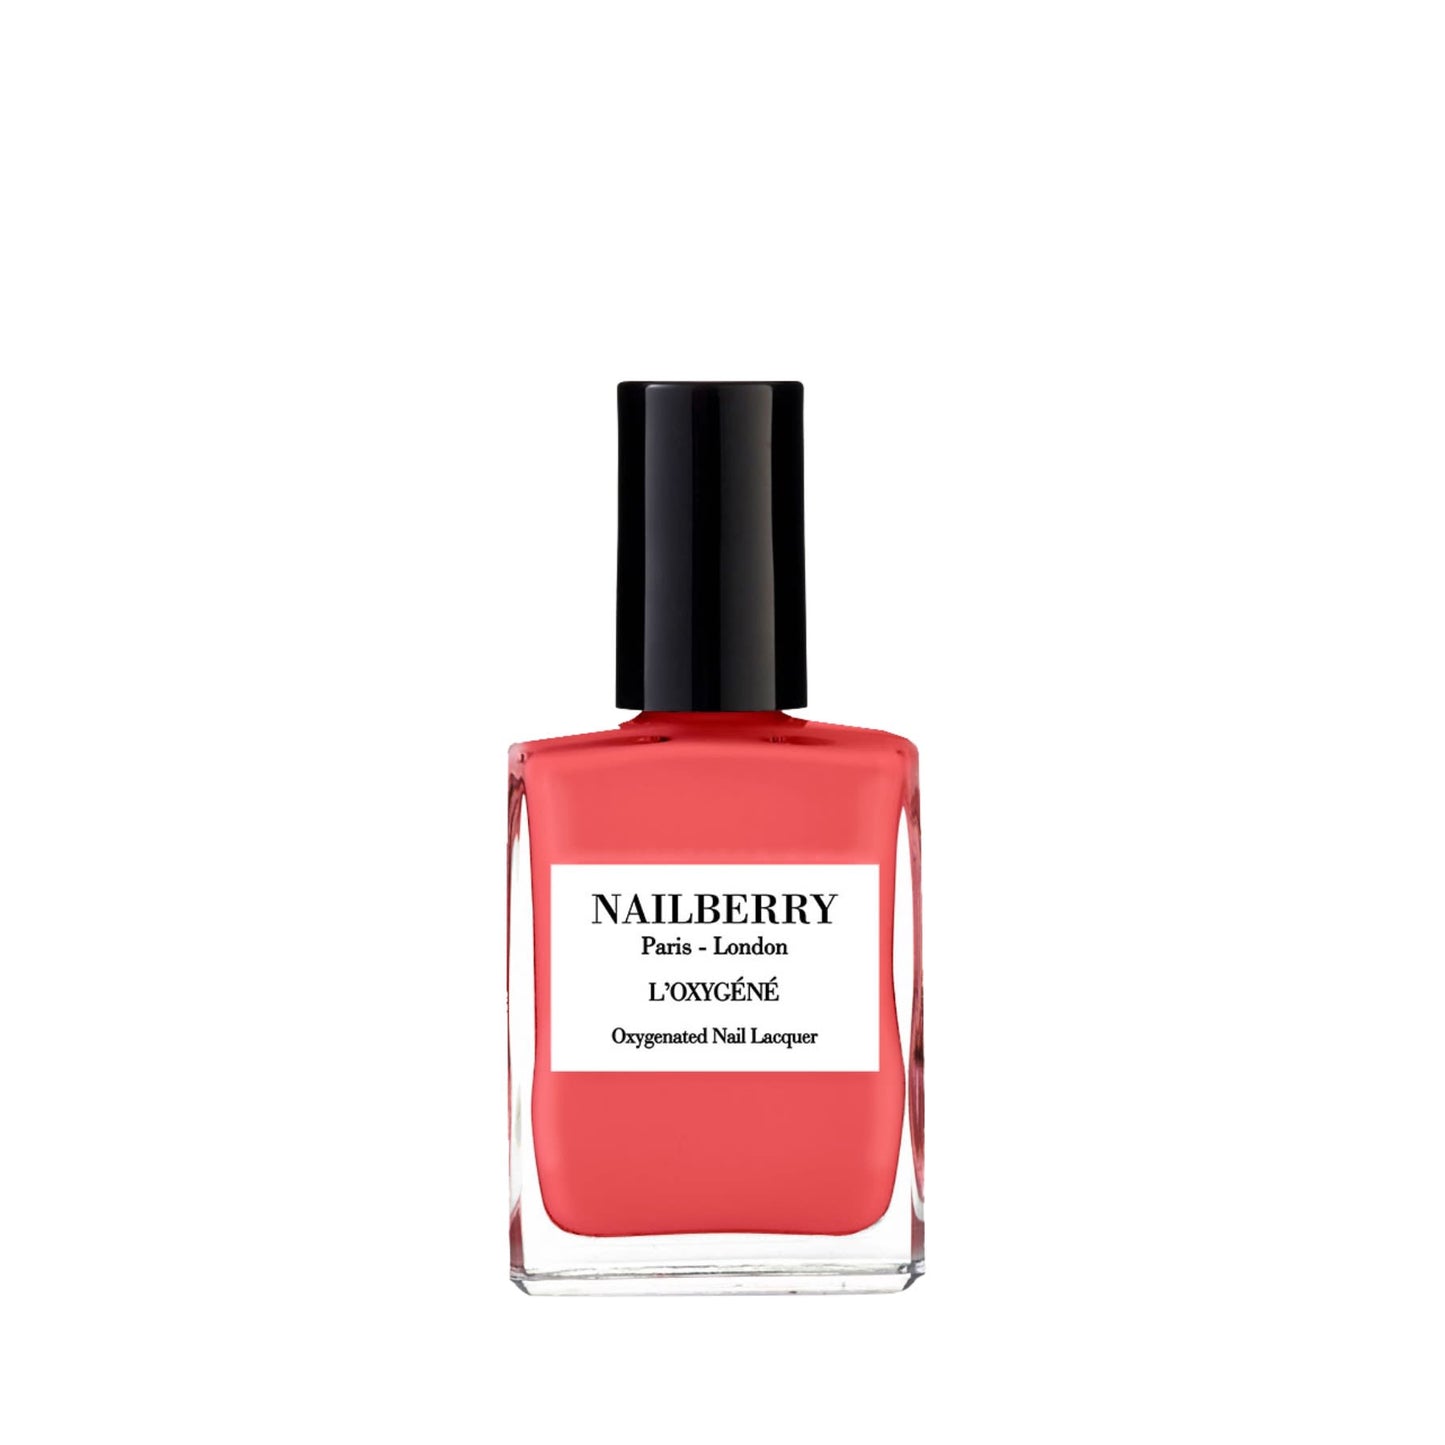 NAILBERRY Jazz me Up